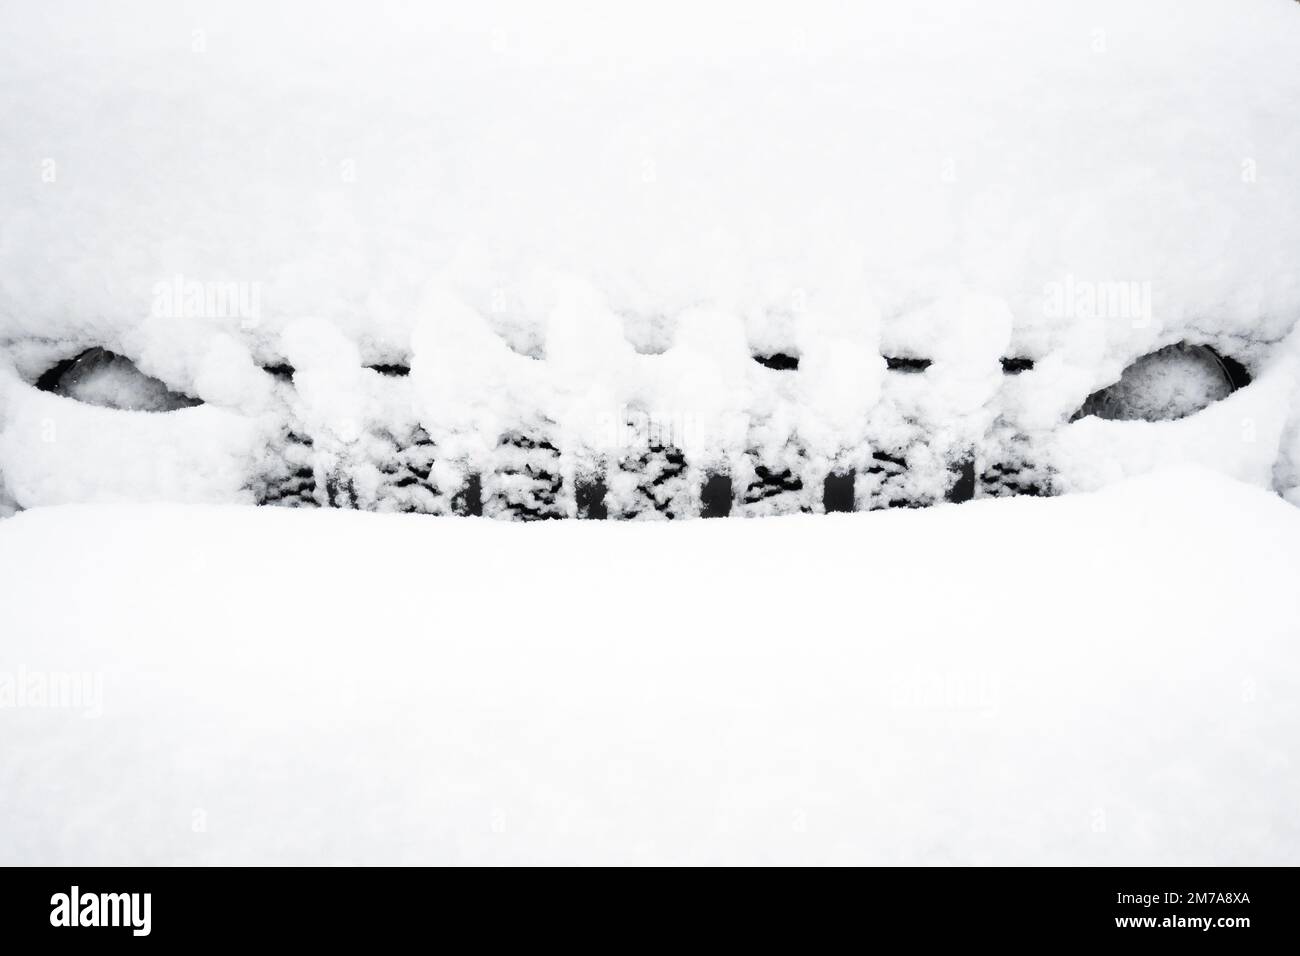 The snow covered grille and headlights of a black Jeep Wrangler buried after a blizzard in the Adirondack Mountains, NY USA Stock Photo